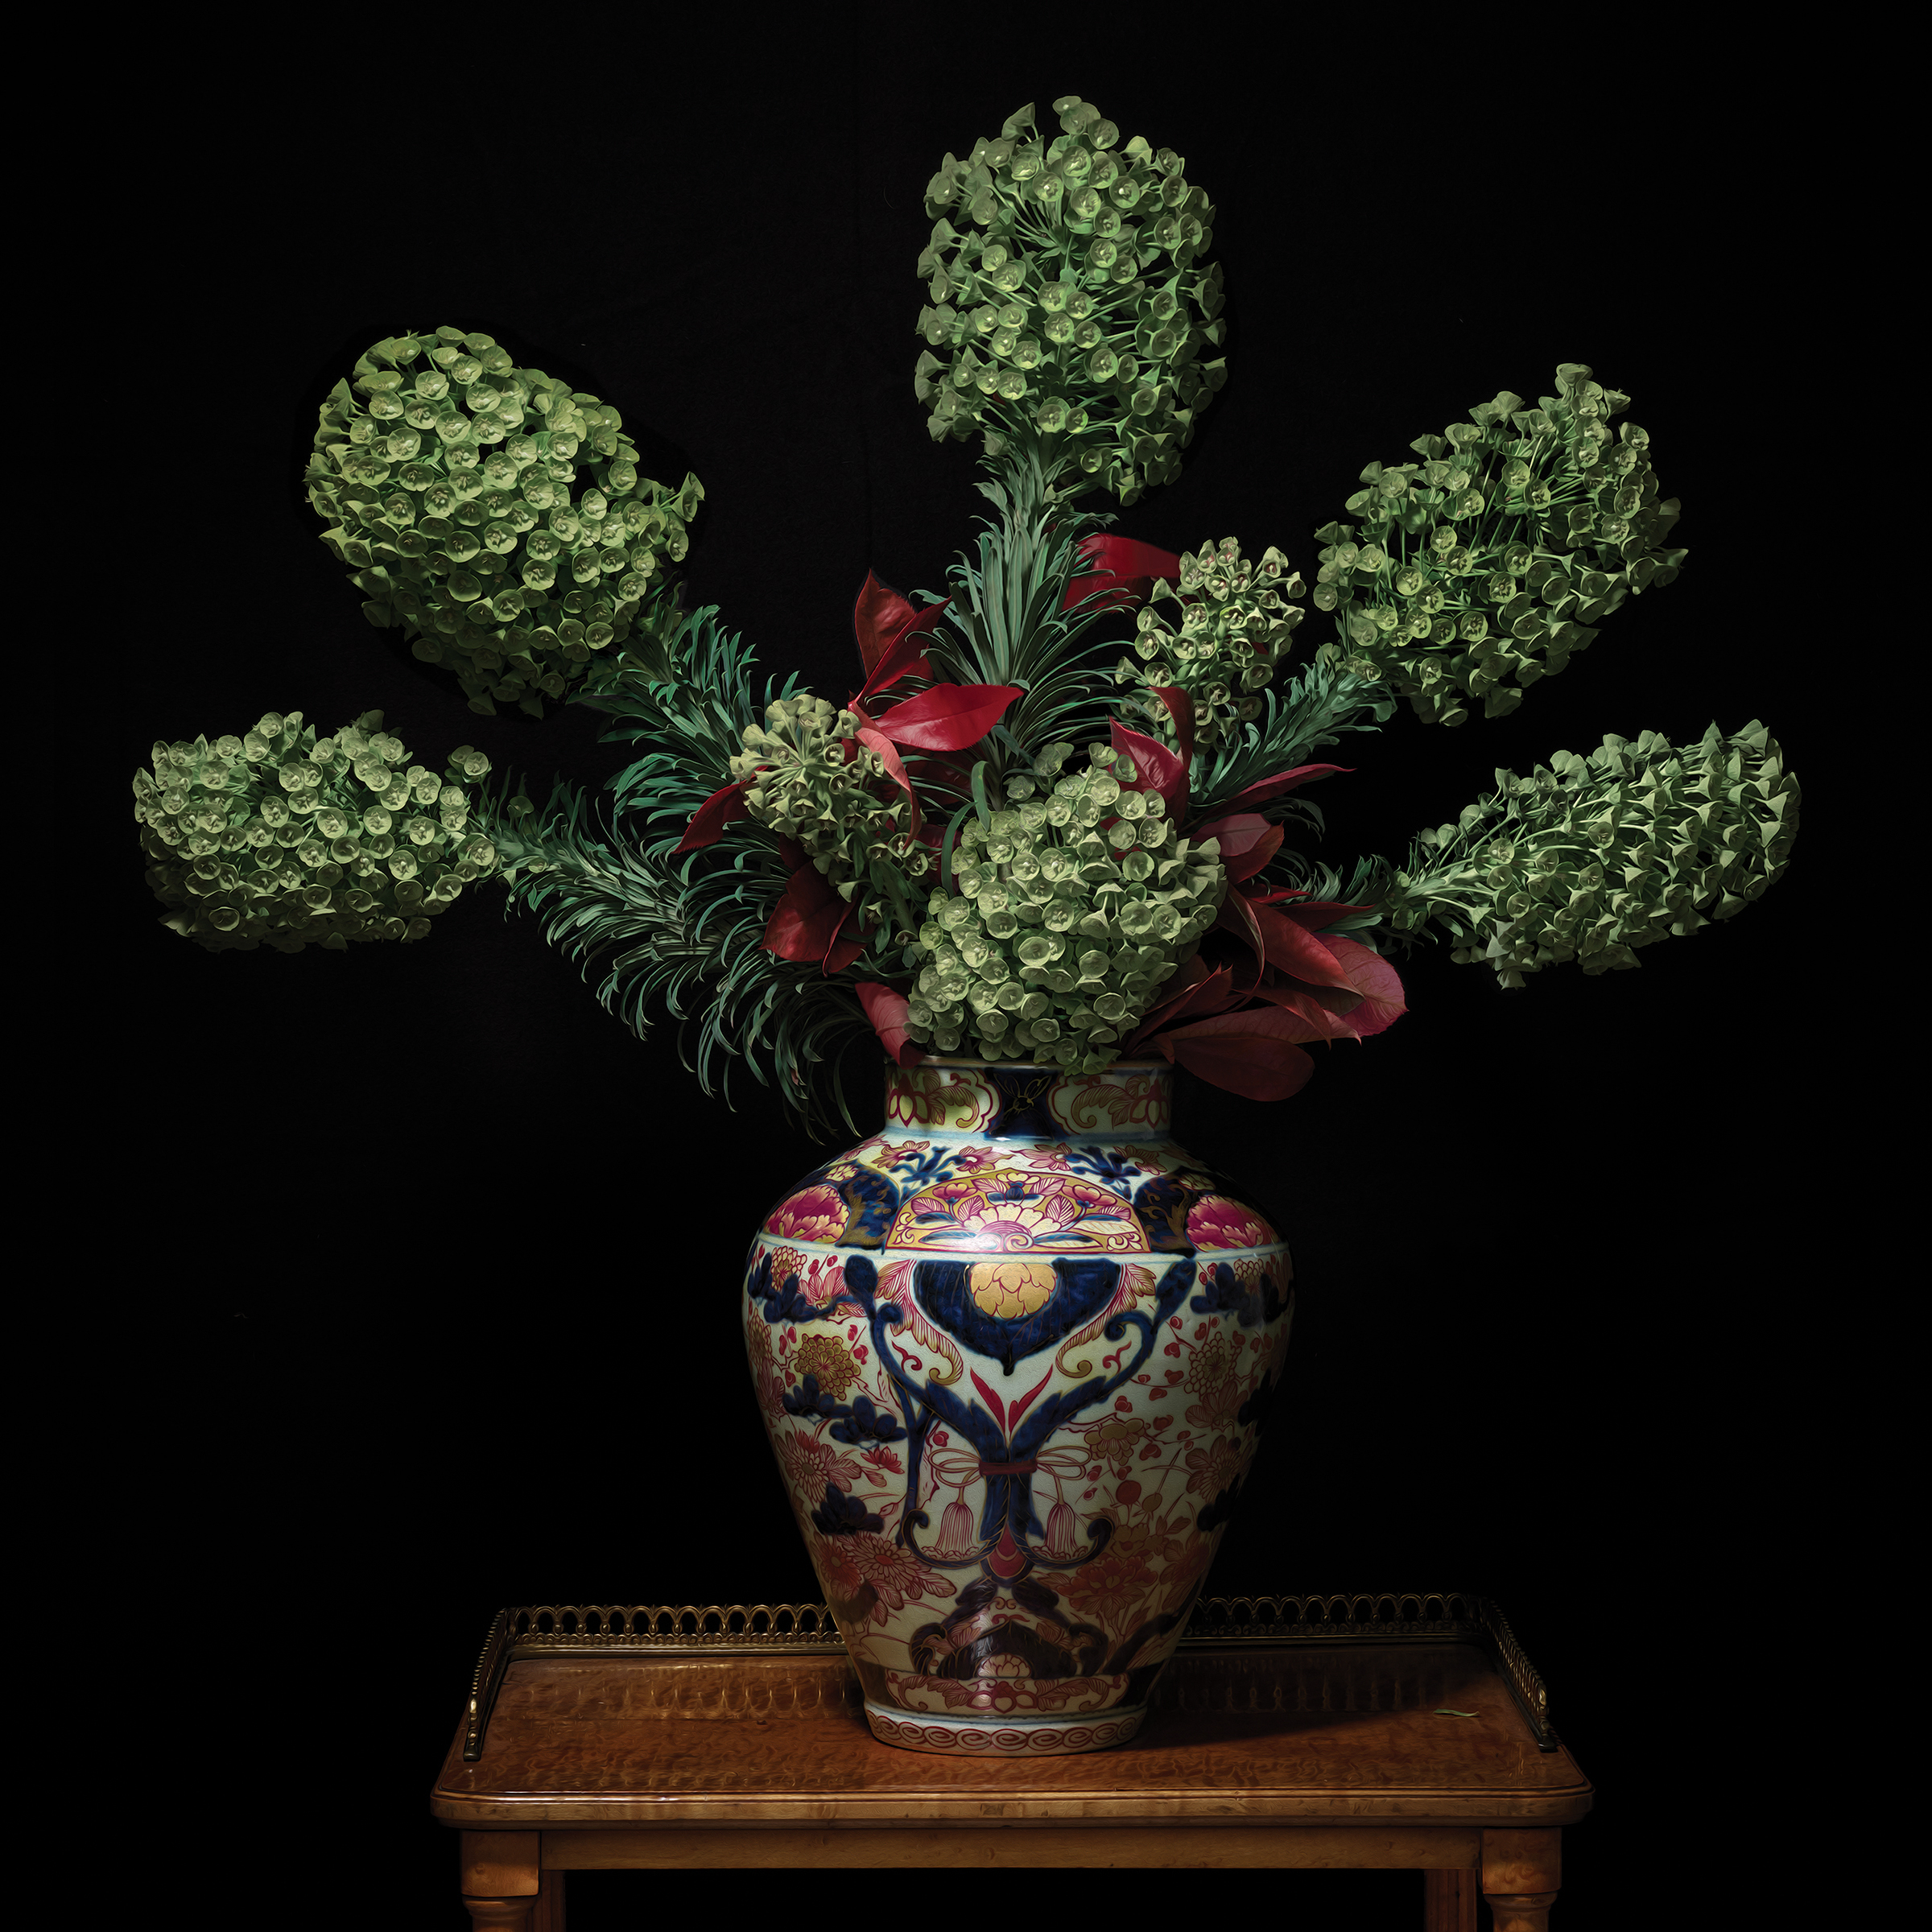     T.M. Glass, Euphorbia in a Japanese Imari Vessel, from the Royal Lodge series, 2018. Courtesy of the artist.

